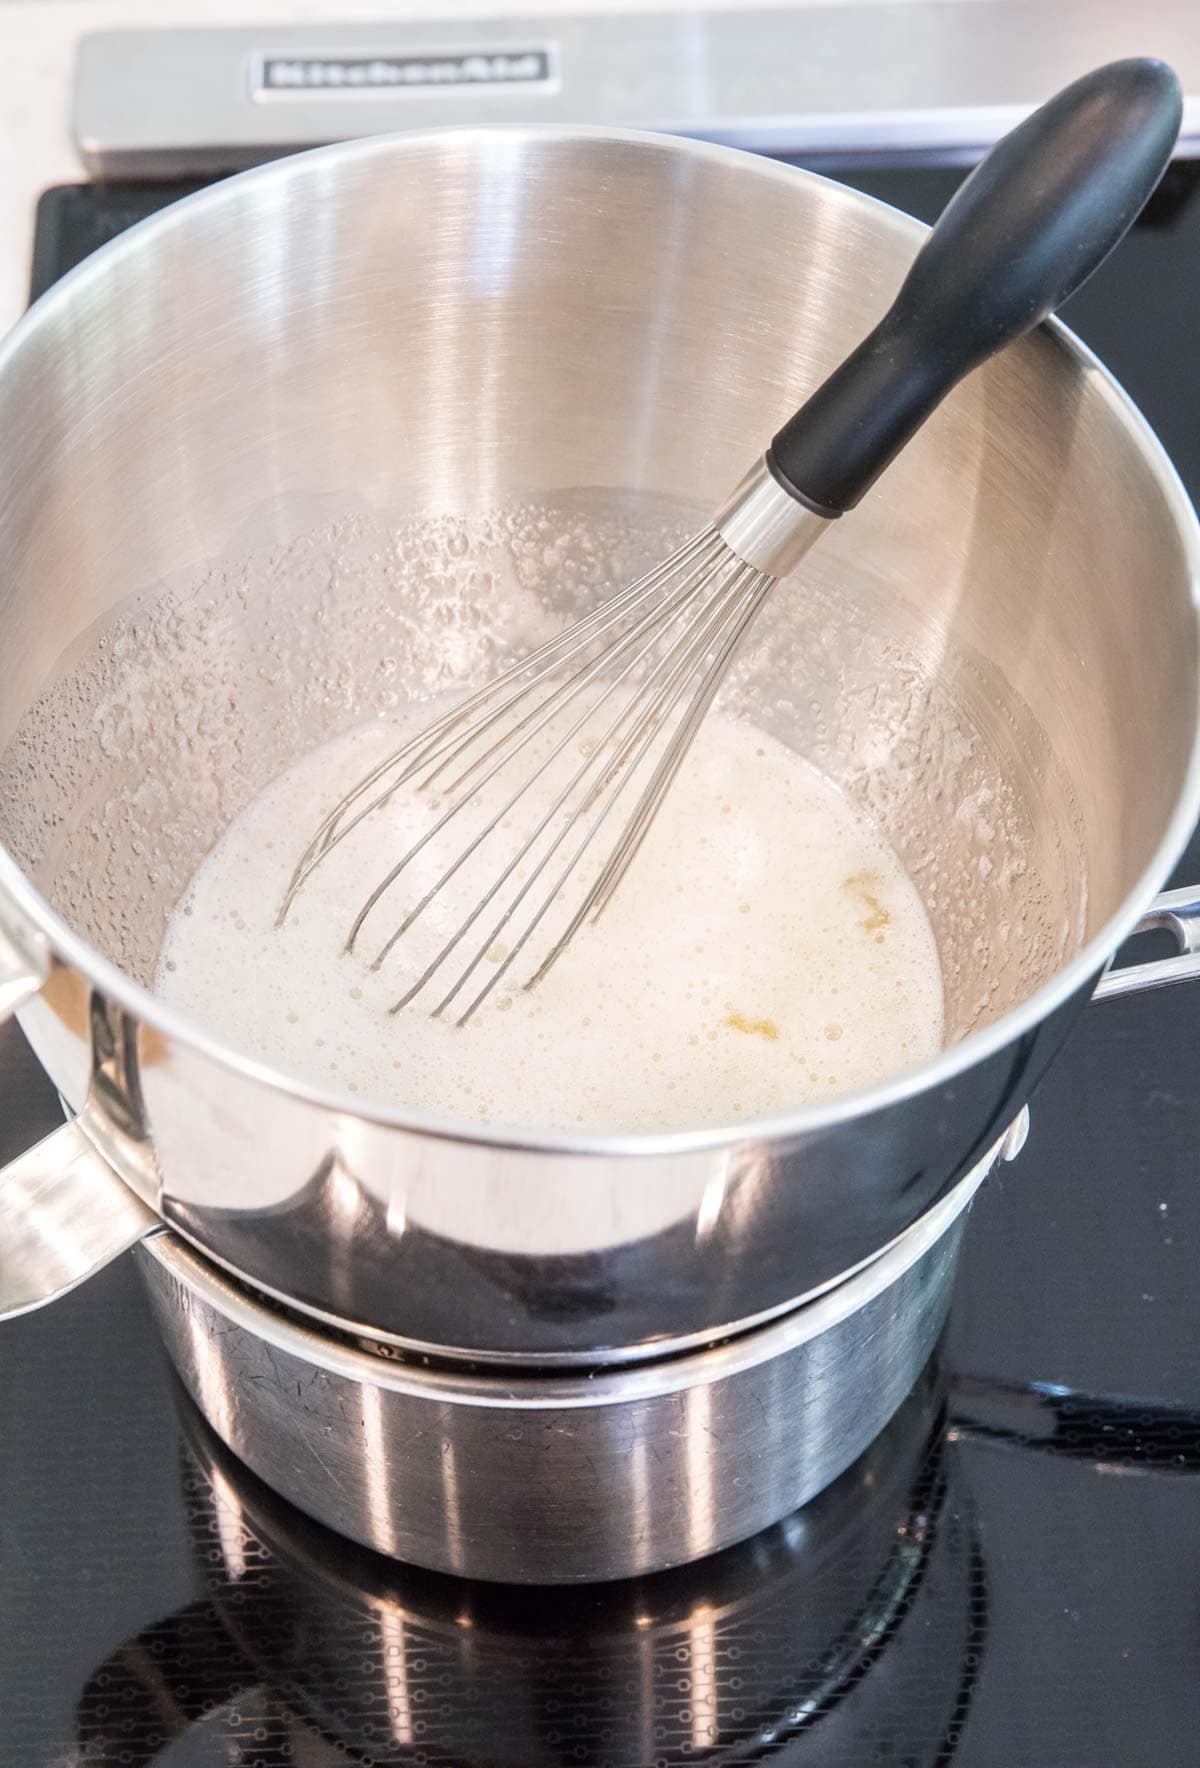 double boiler setup with a whisk resting in a sugar and egg white mixture